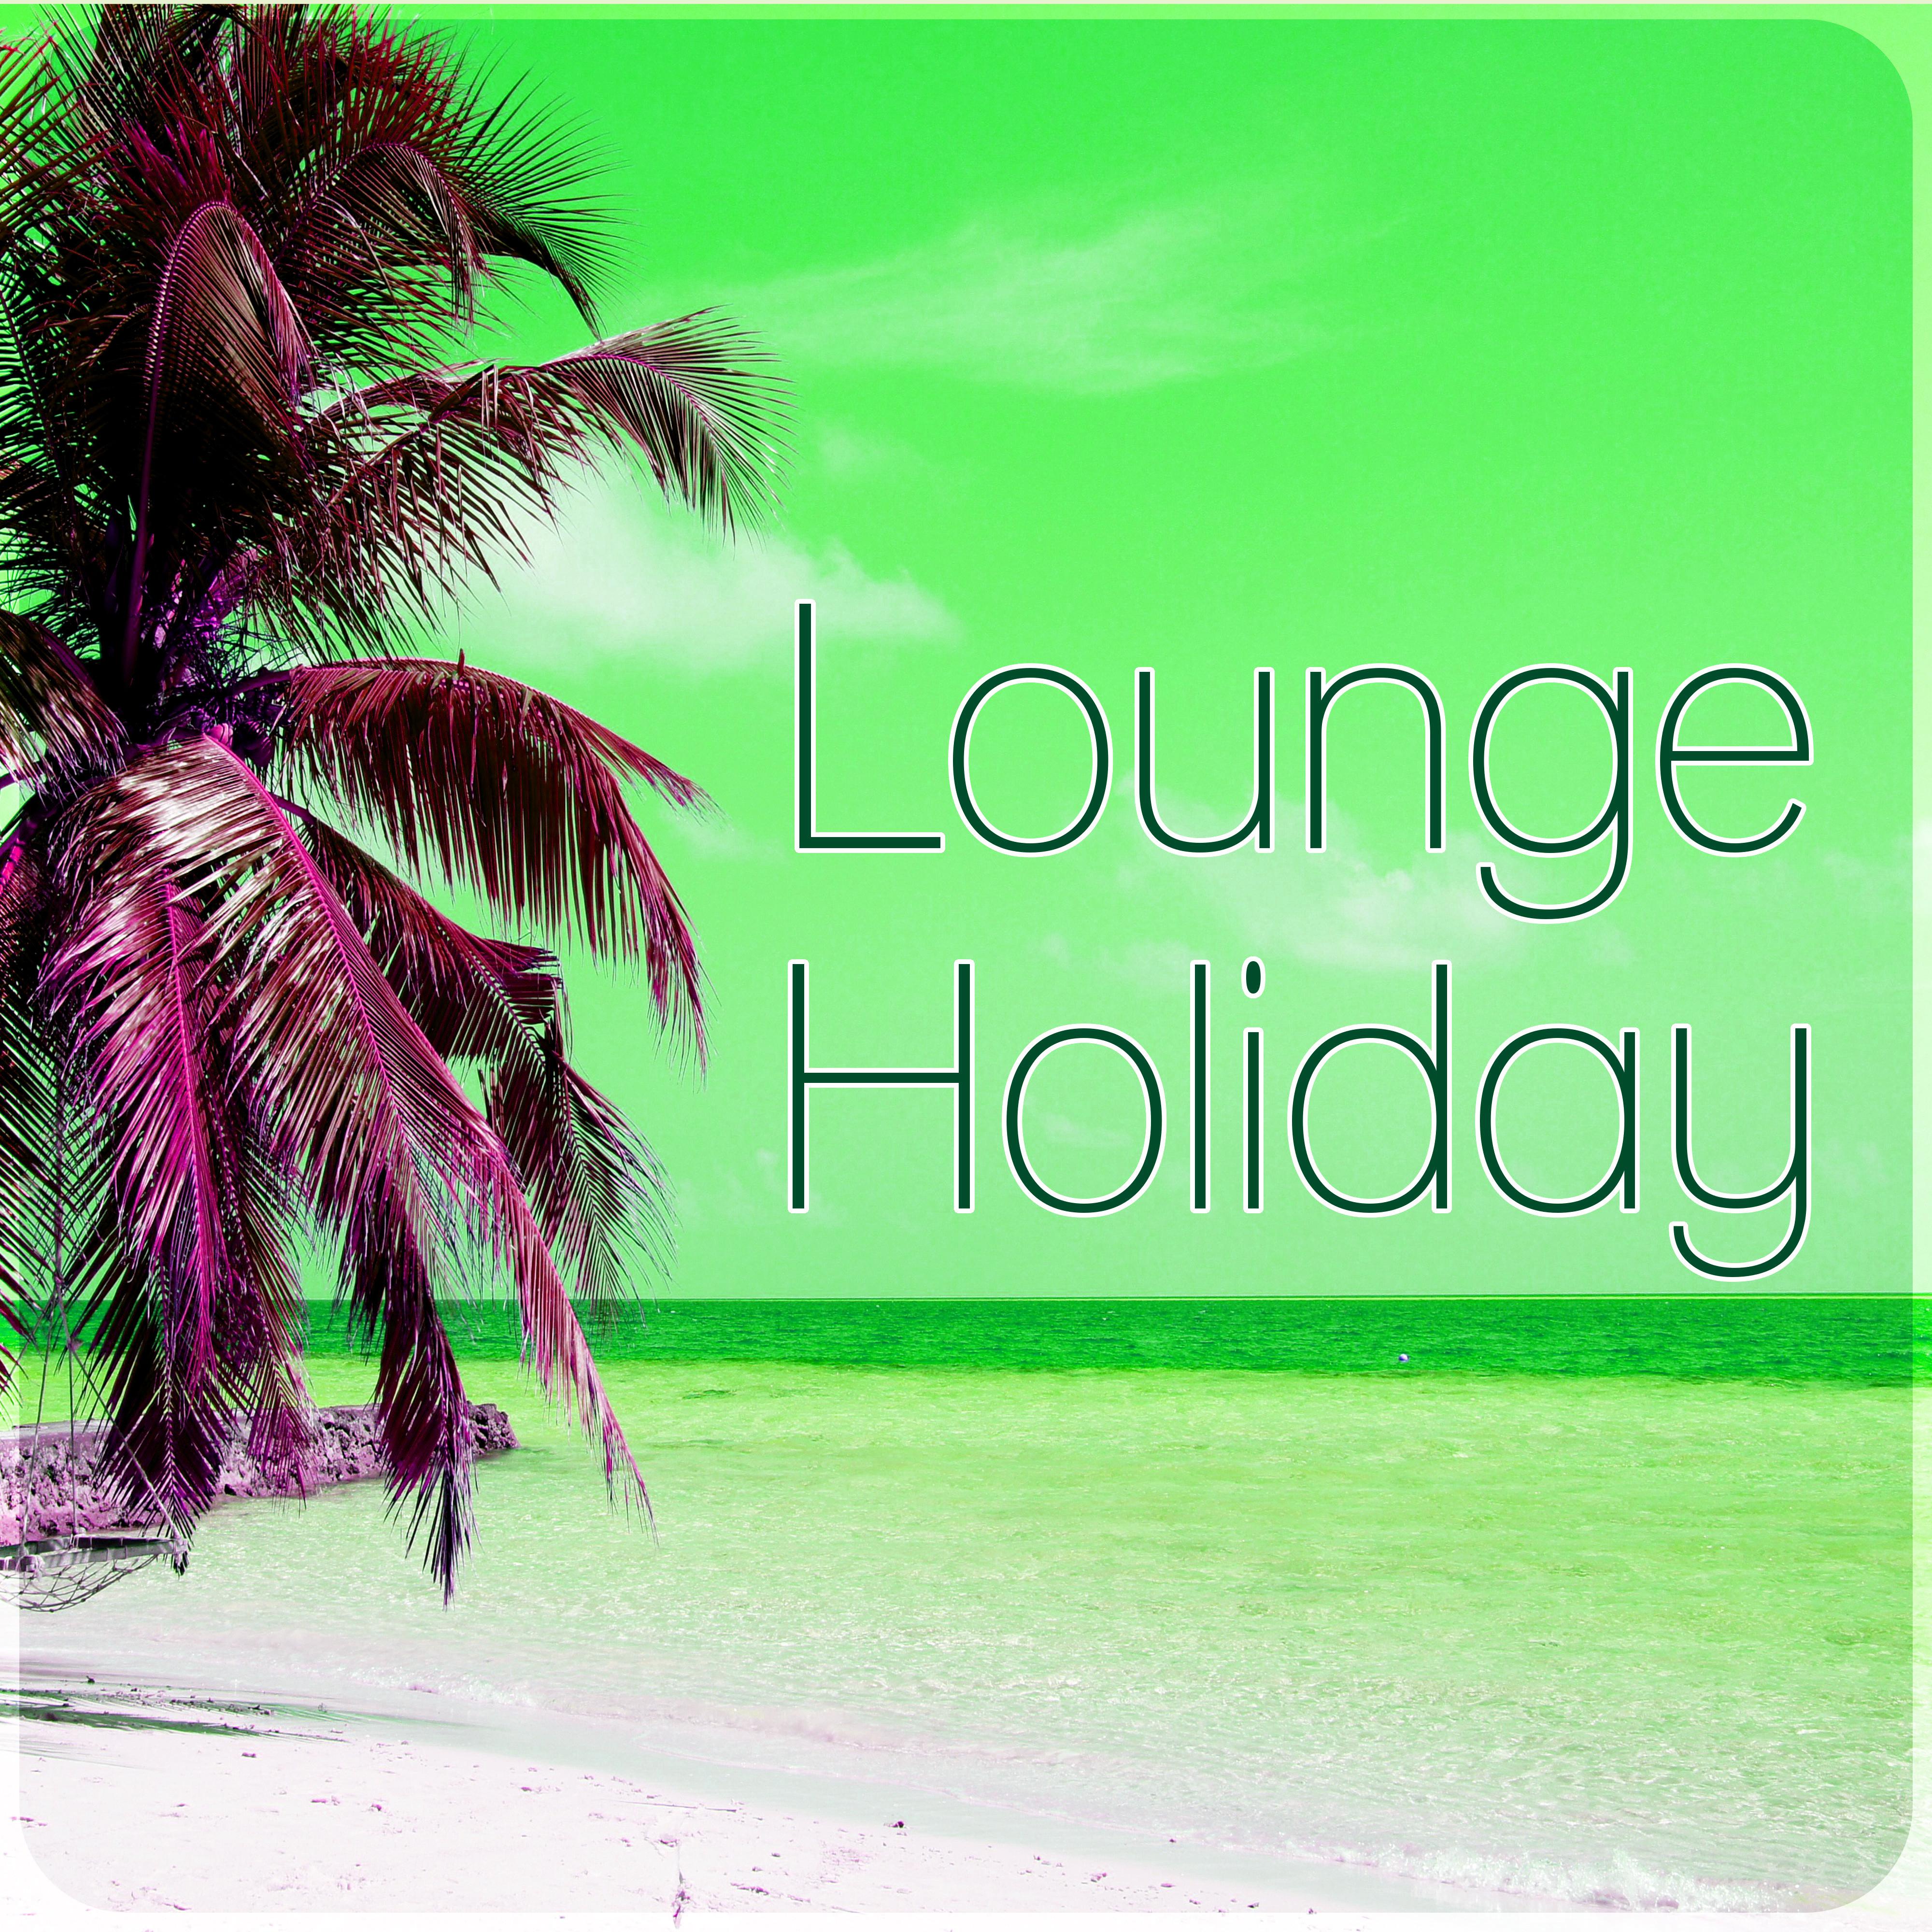 Lounge Holiday – Drink Bar, Solar Surfer, Chilled Holiday, Cafe Lounge, Summer Time